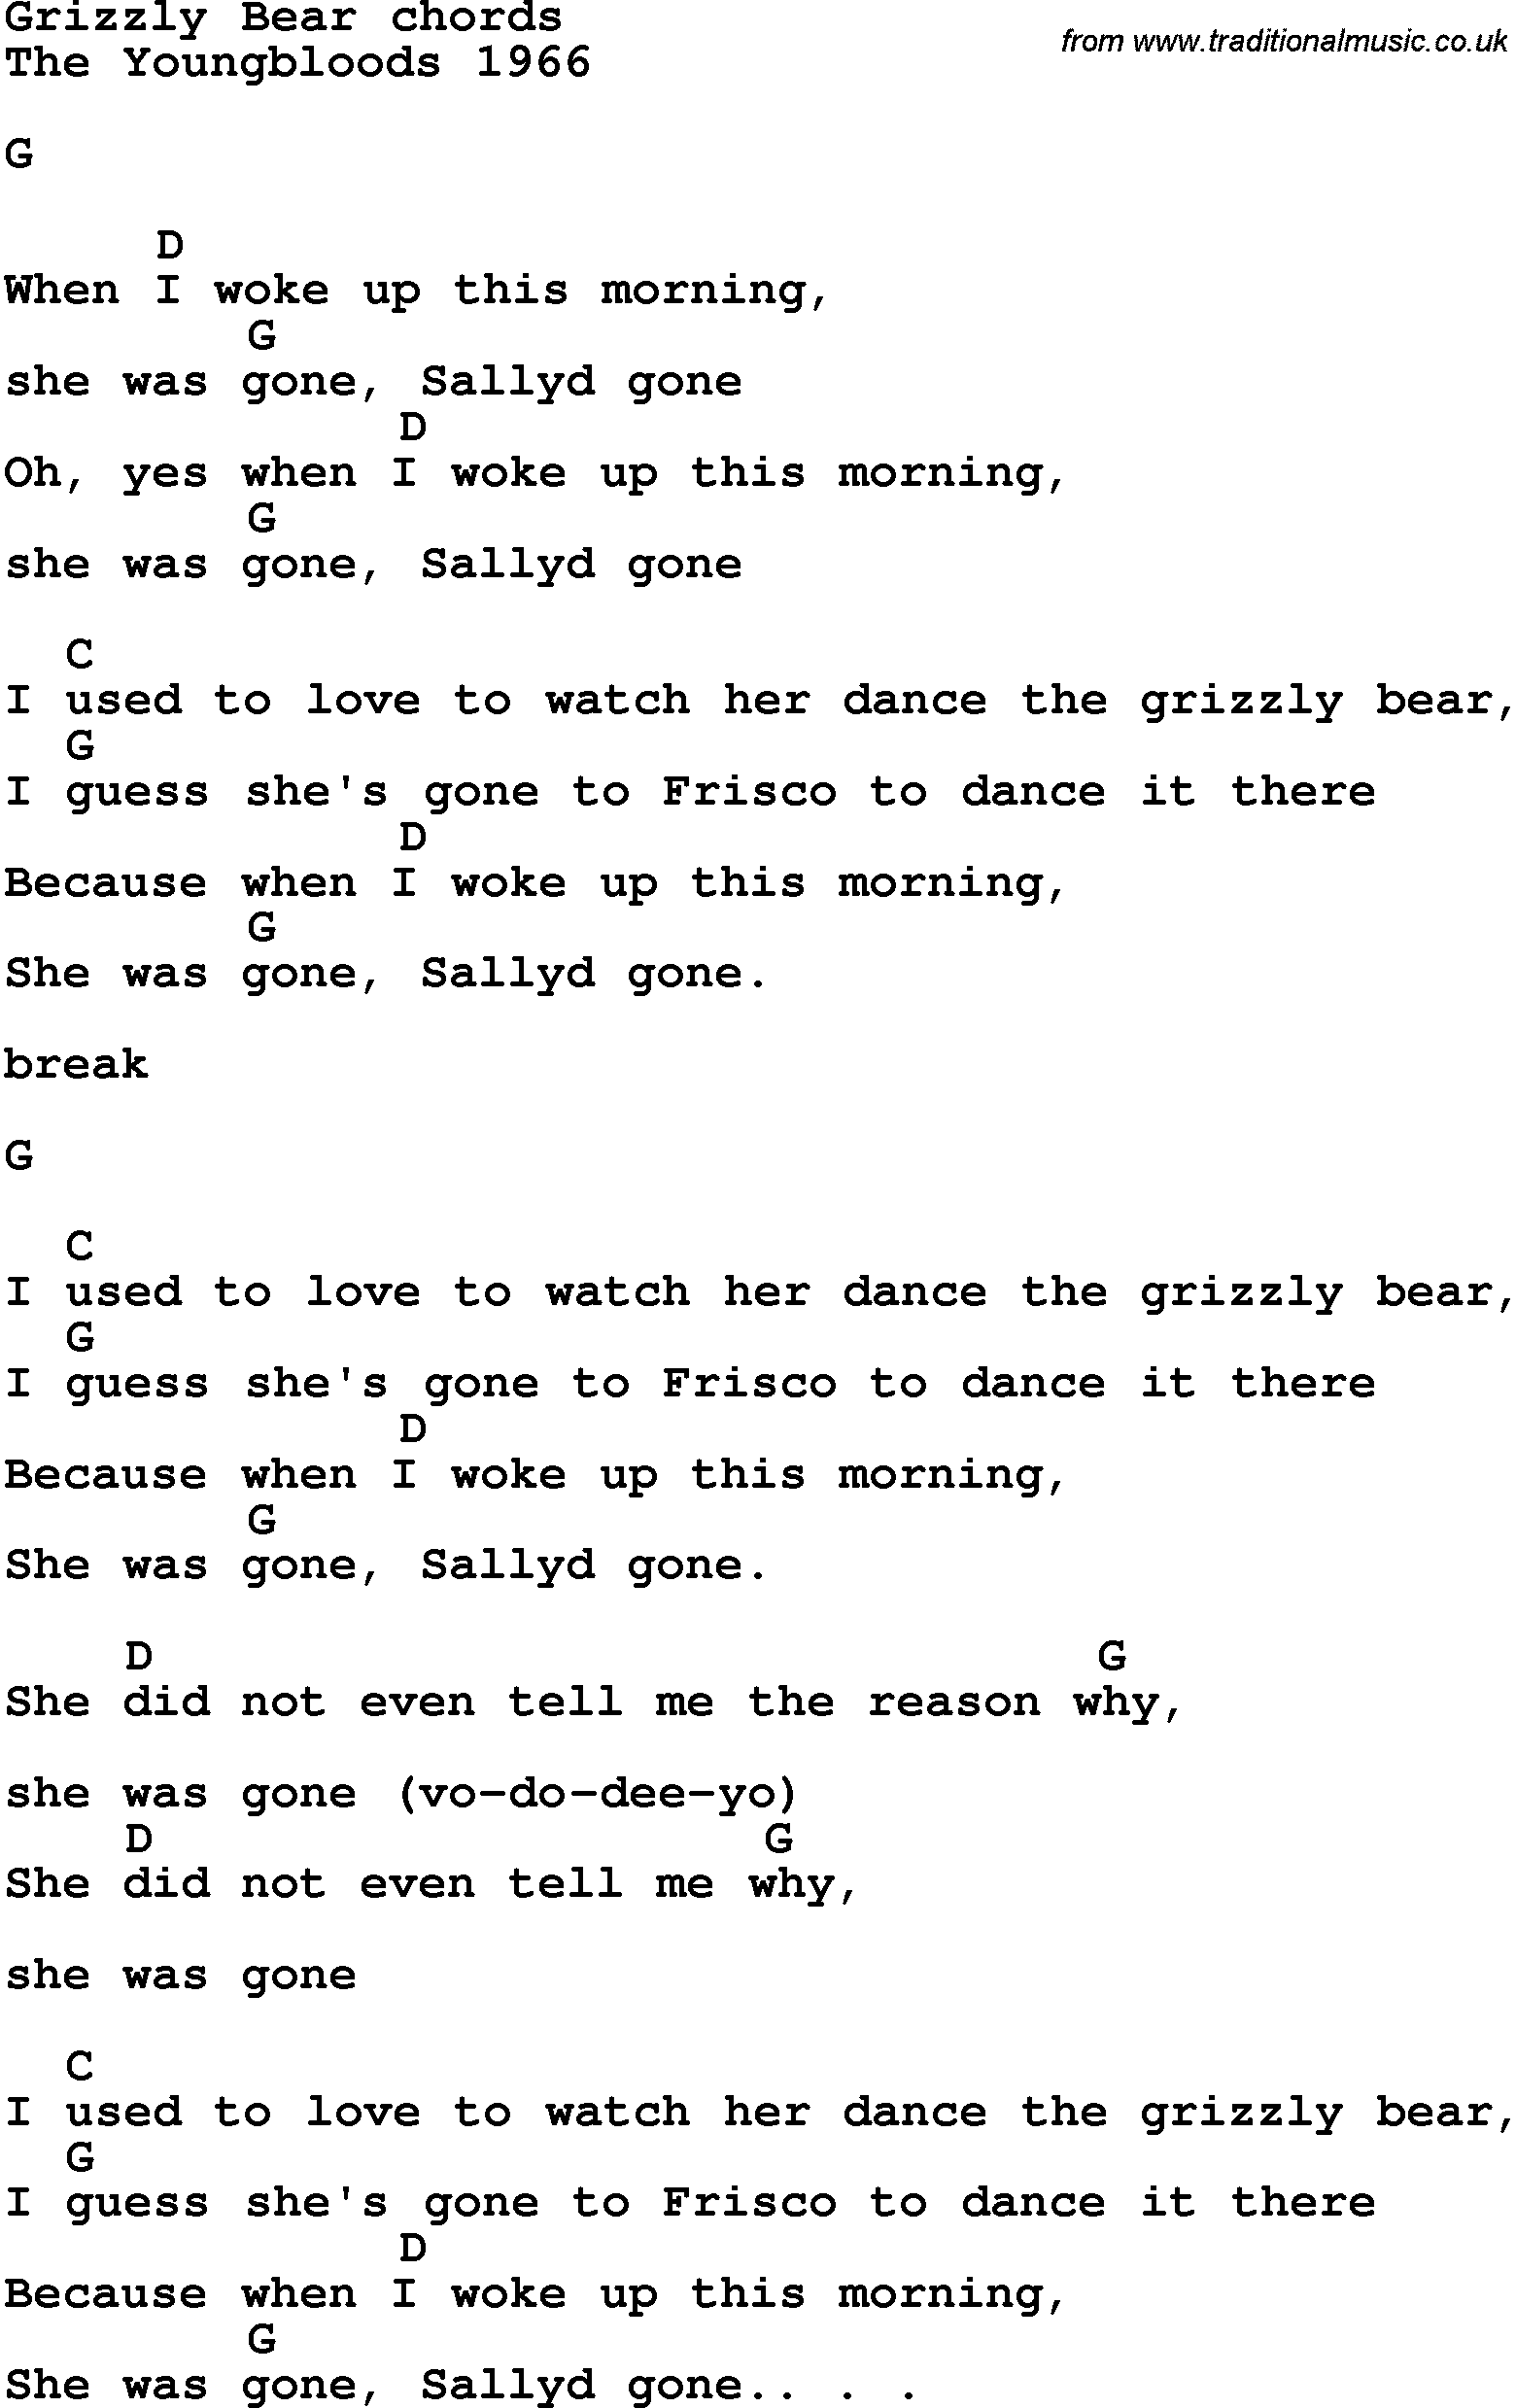 Song Lyrics with guitar chords for Grizzly Bear